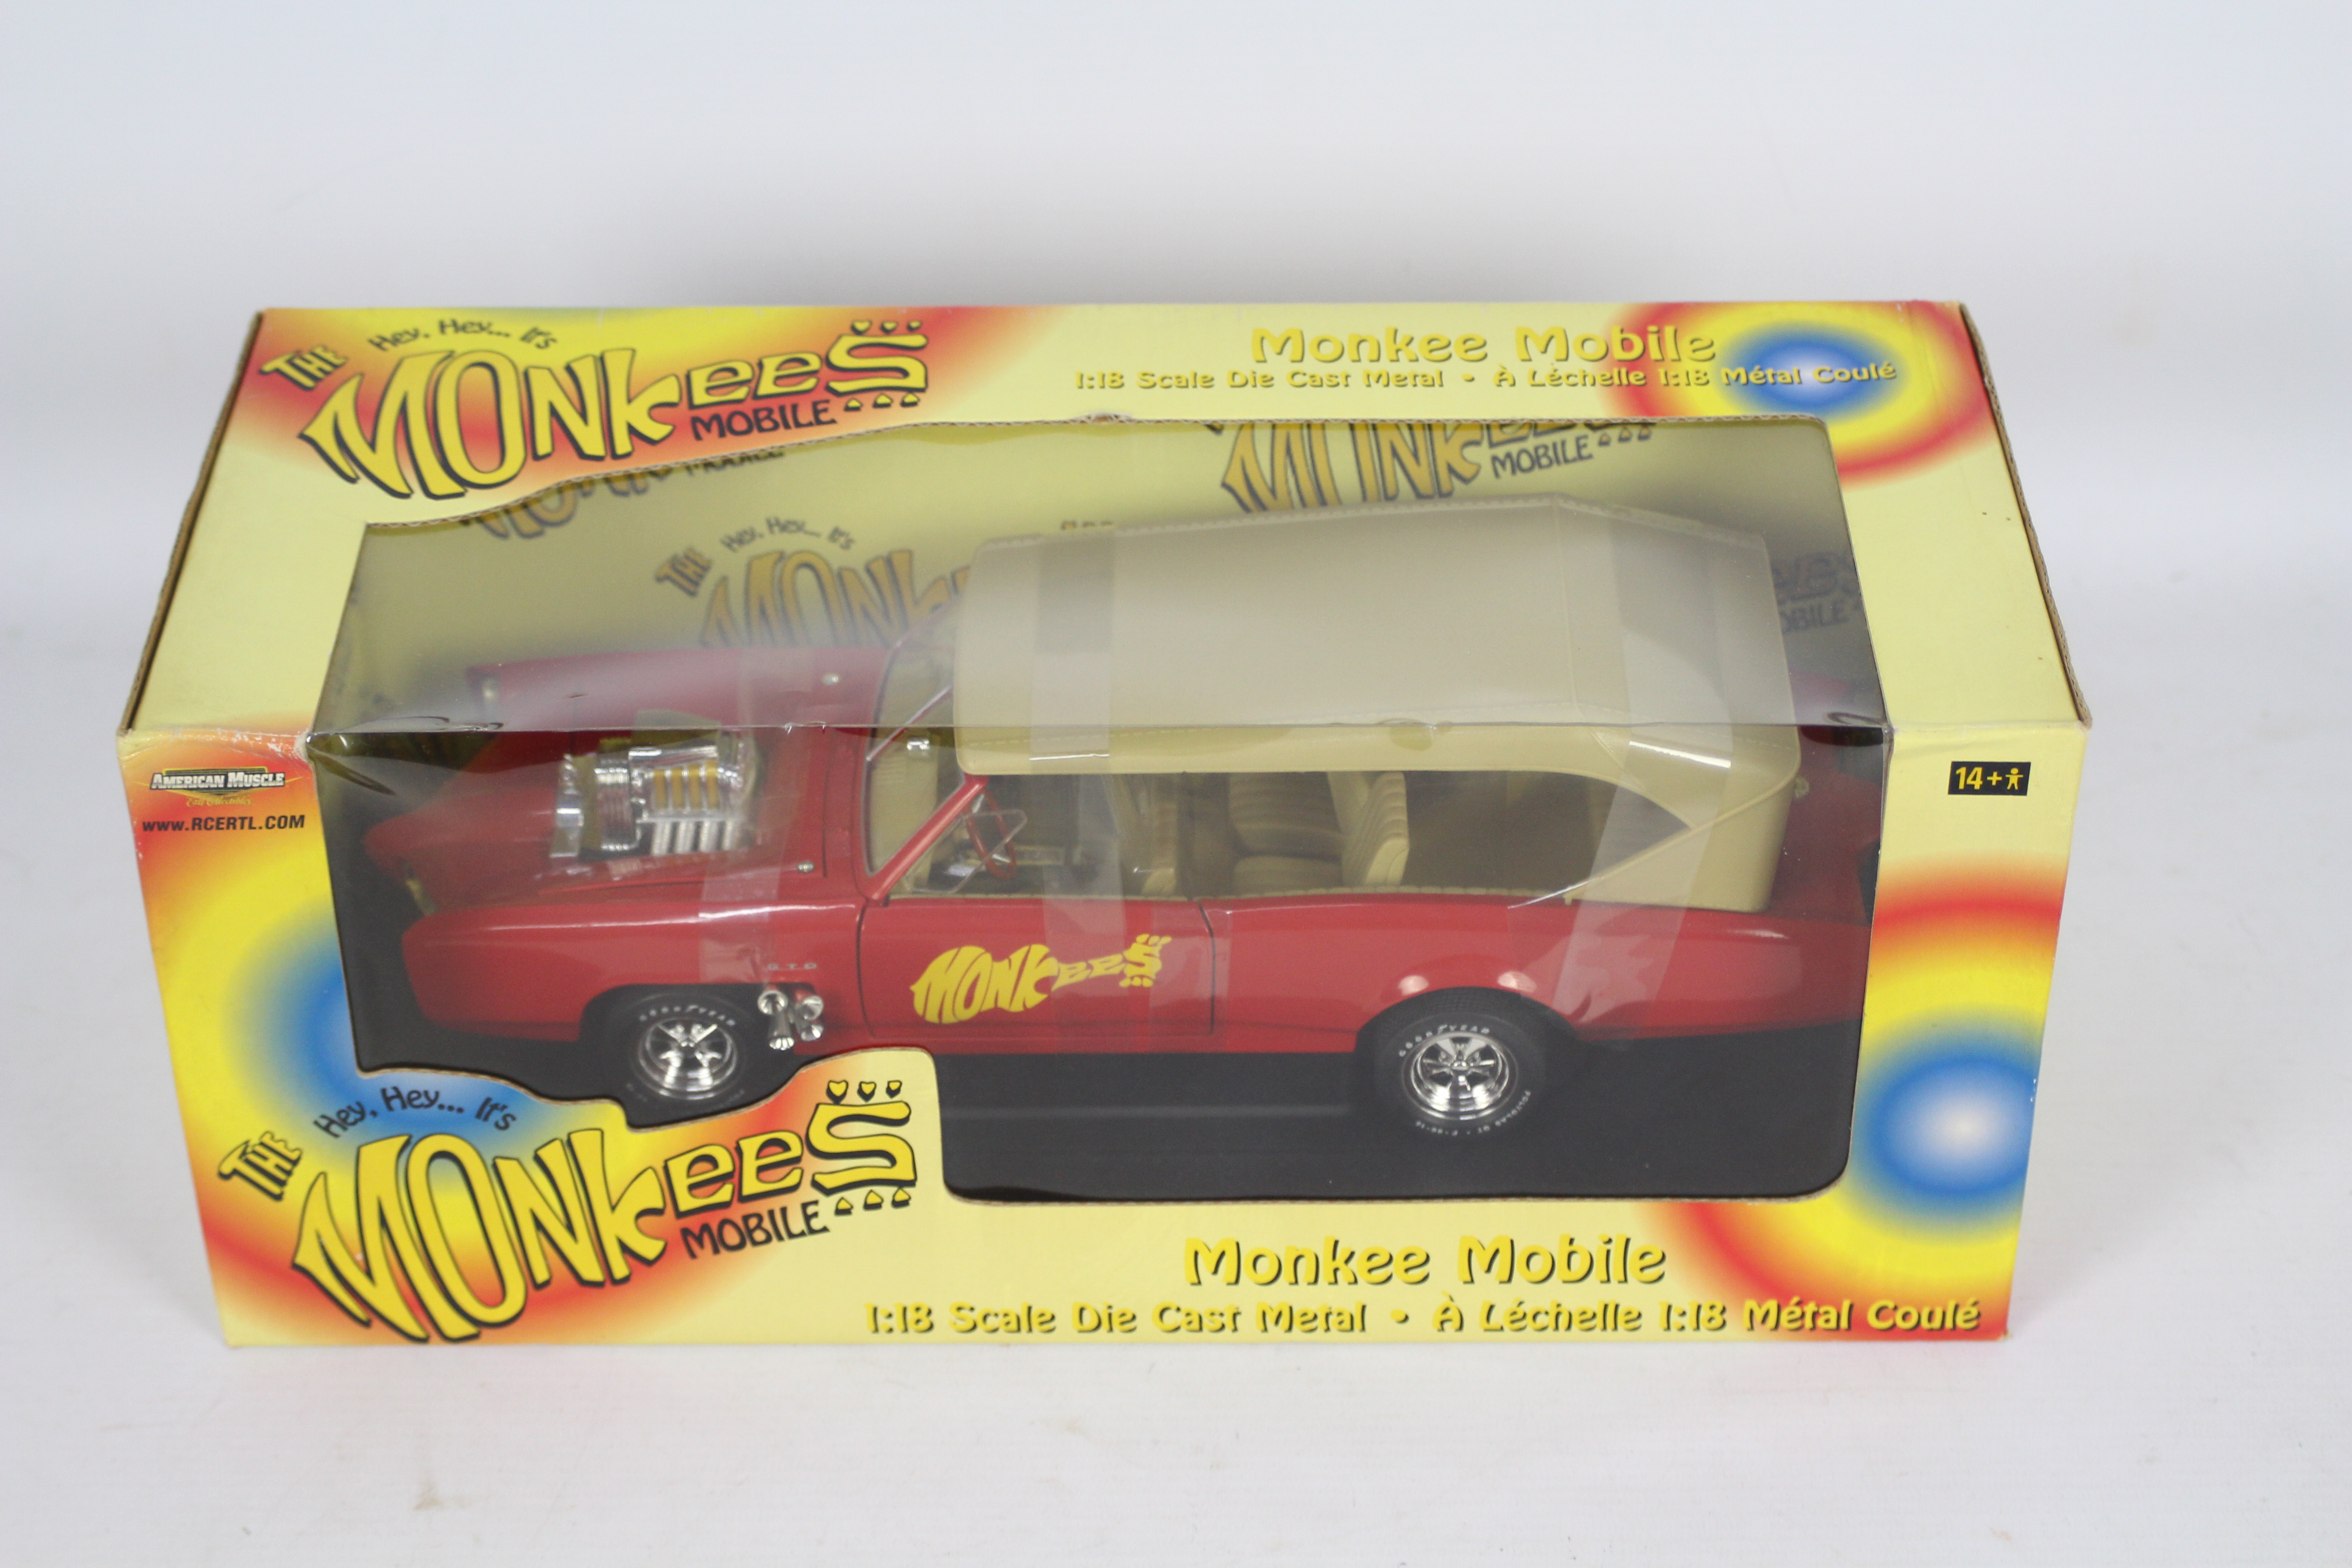 Ertl - A boxed 1:18 scale Ertl 'American Muscle' #33150 'Monkee Mobile'. - Image 2 of 2